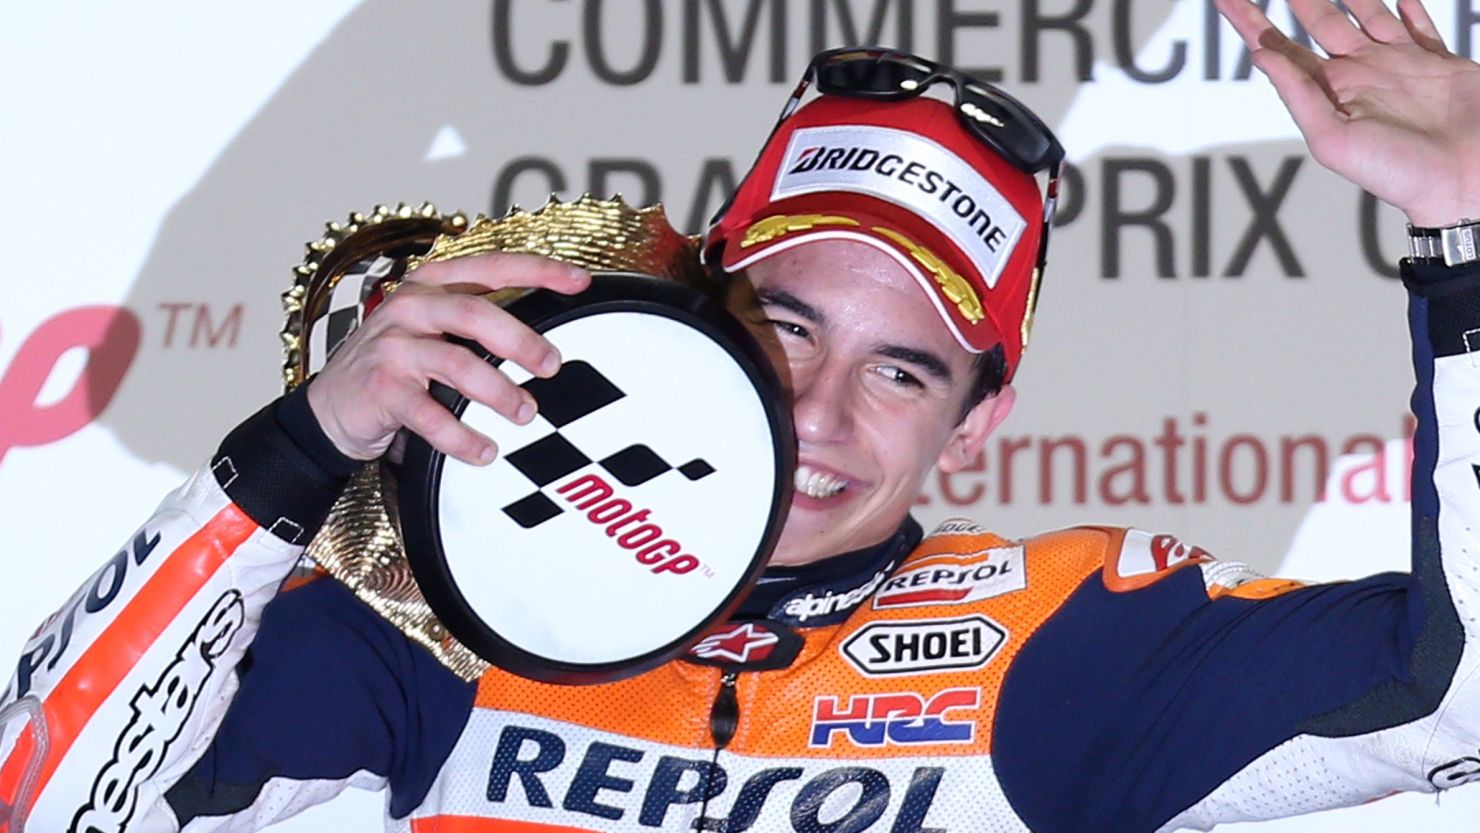 Reigning world champion Marc Marquez had more reason to smile after winning the MotoGP opener in Qatar. 